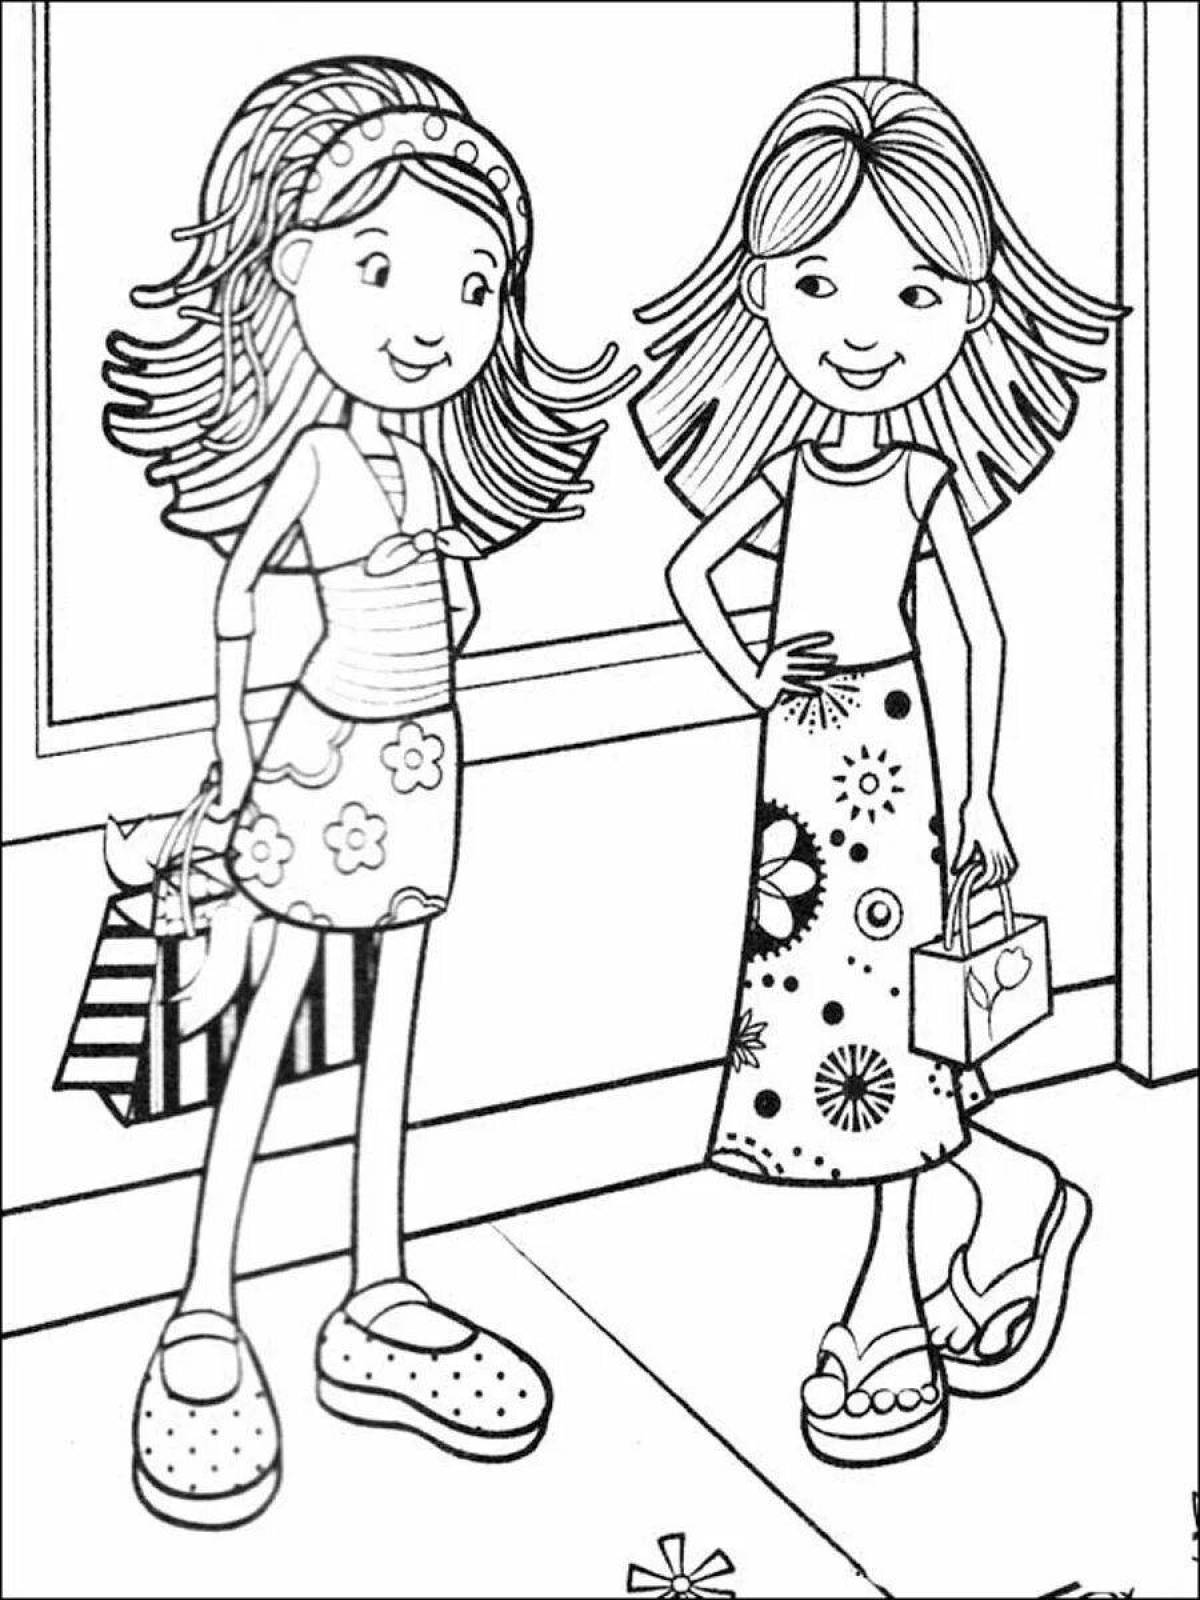 Funny girls in the coloring shop